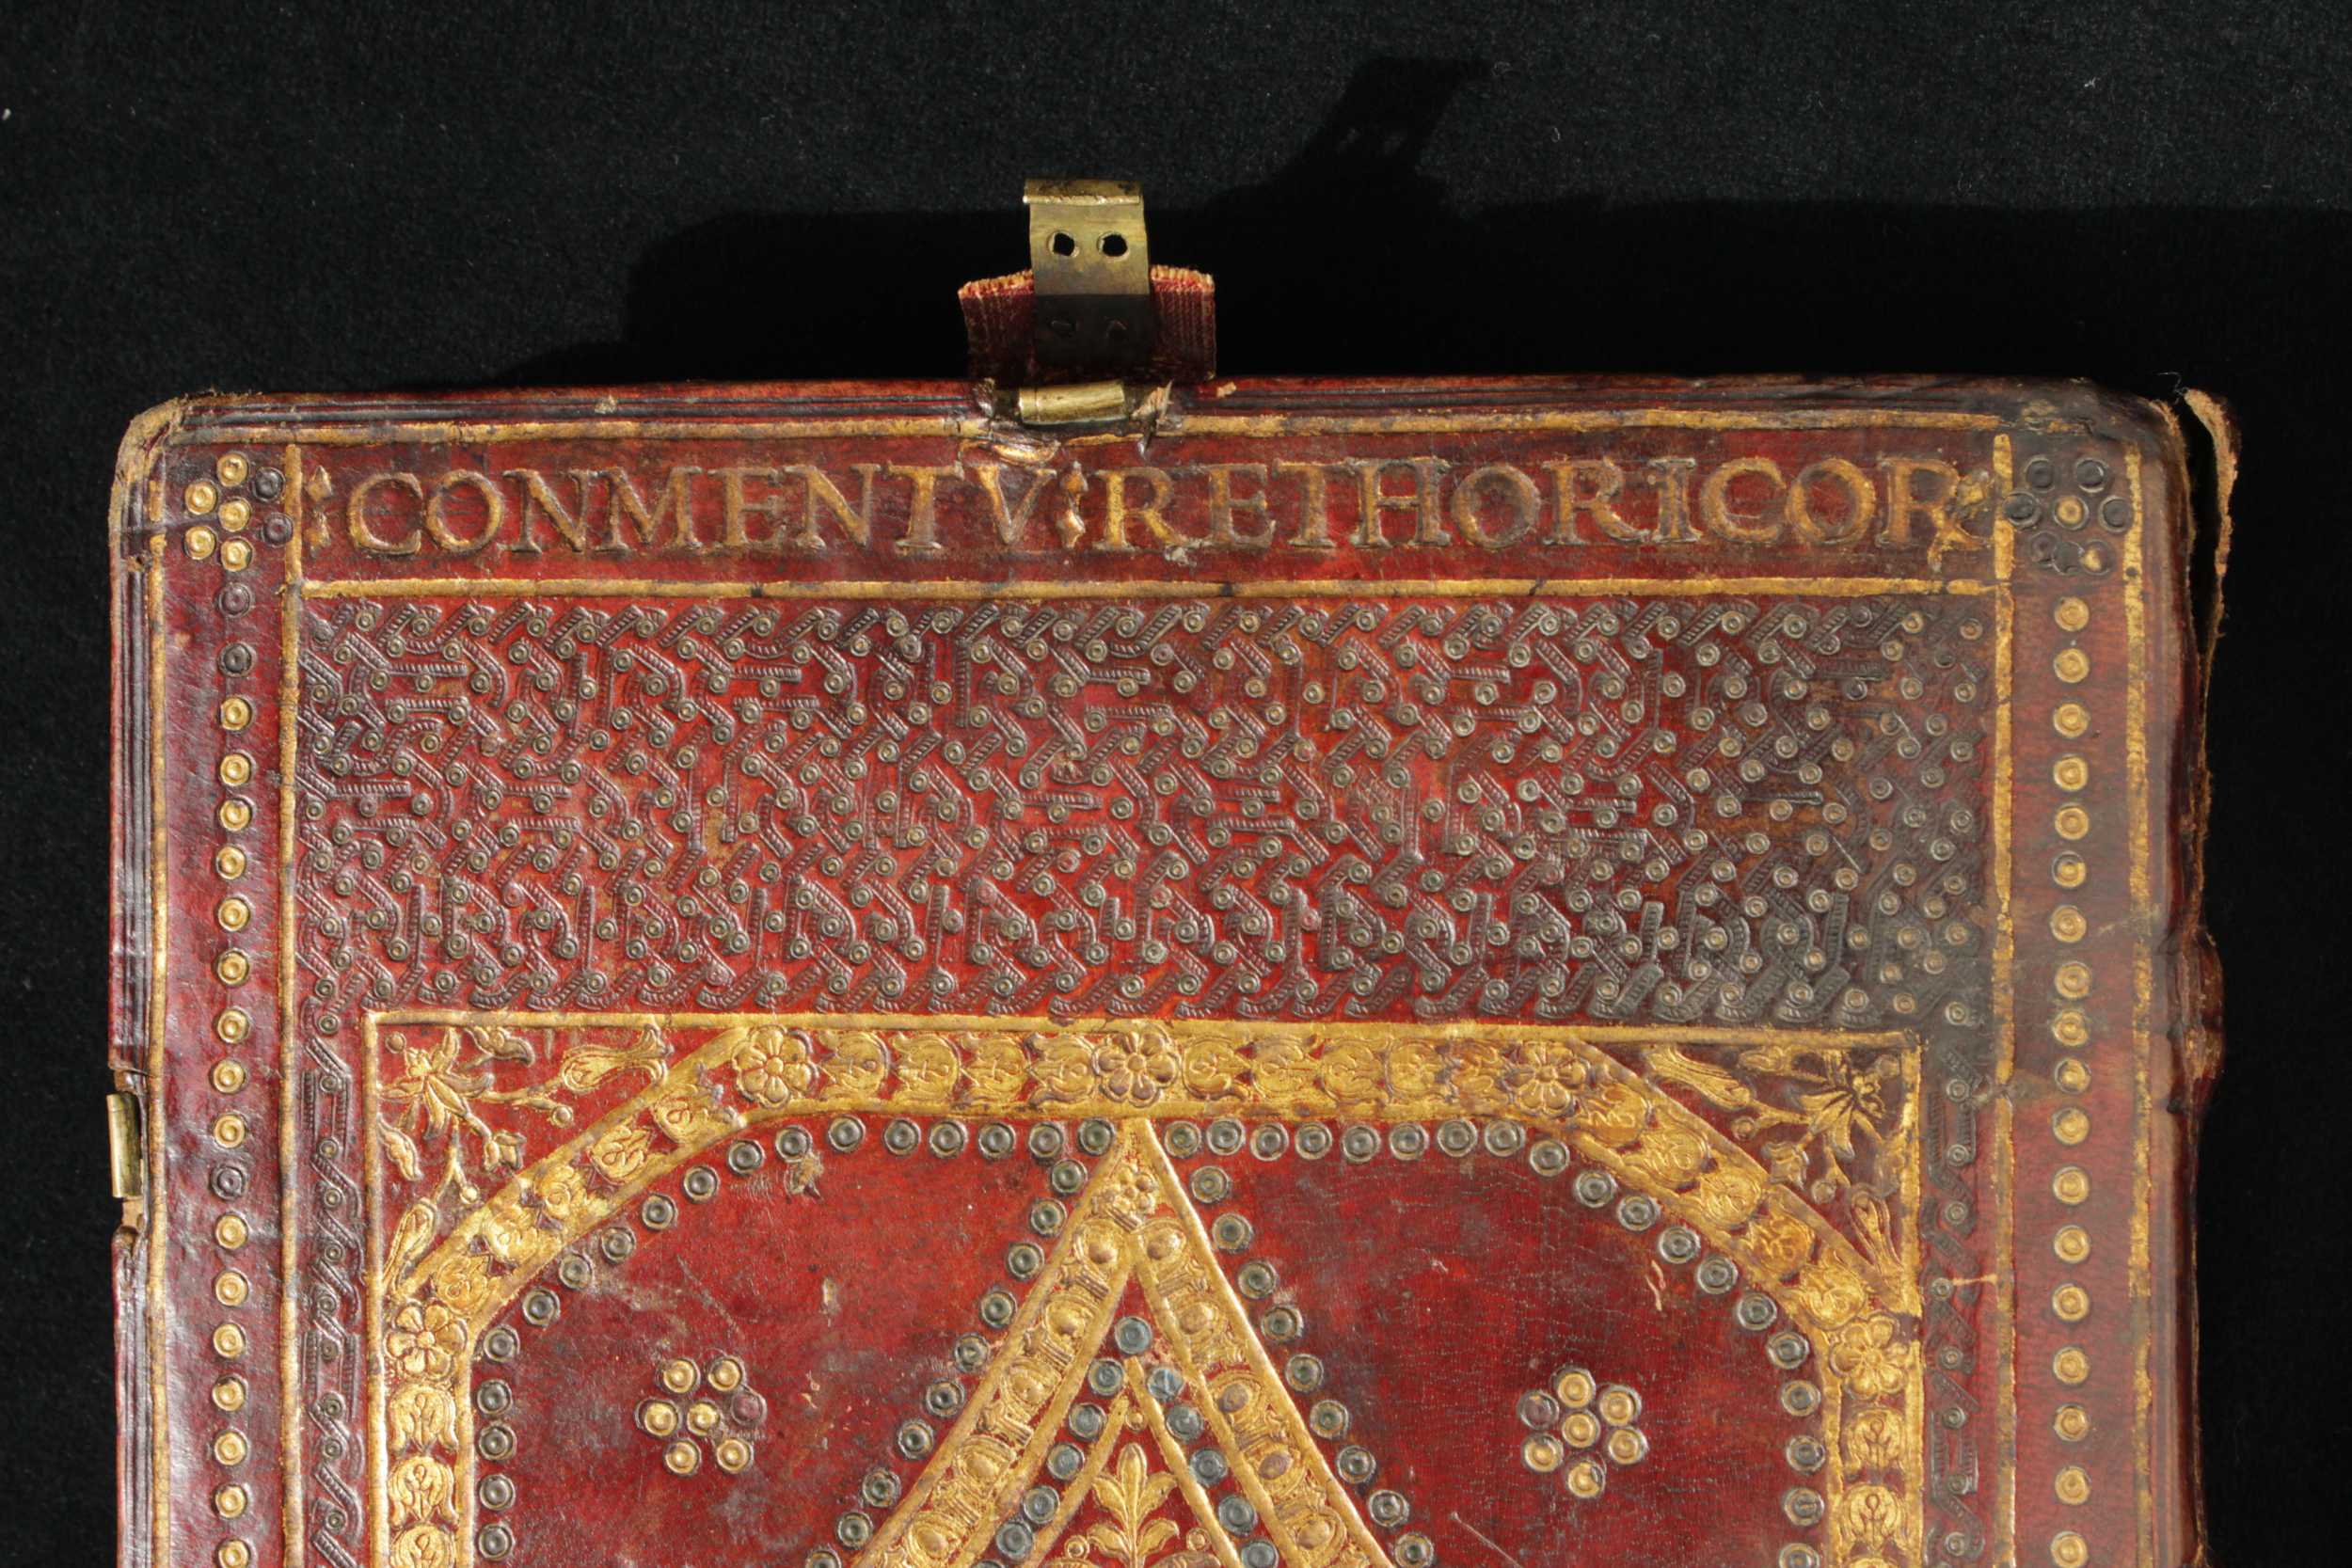 Gilded titling on leather corvina bindings can be read on the right board